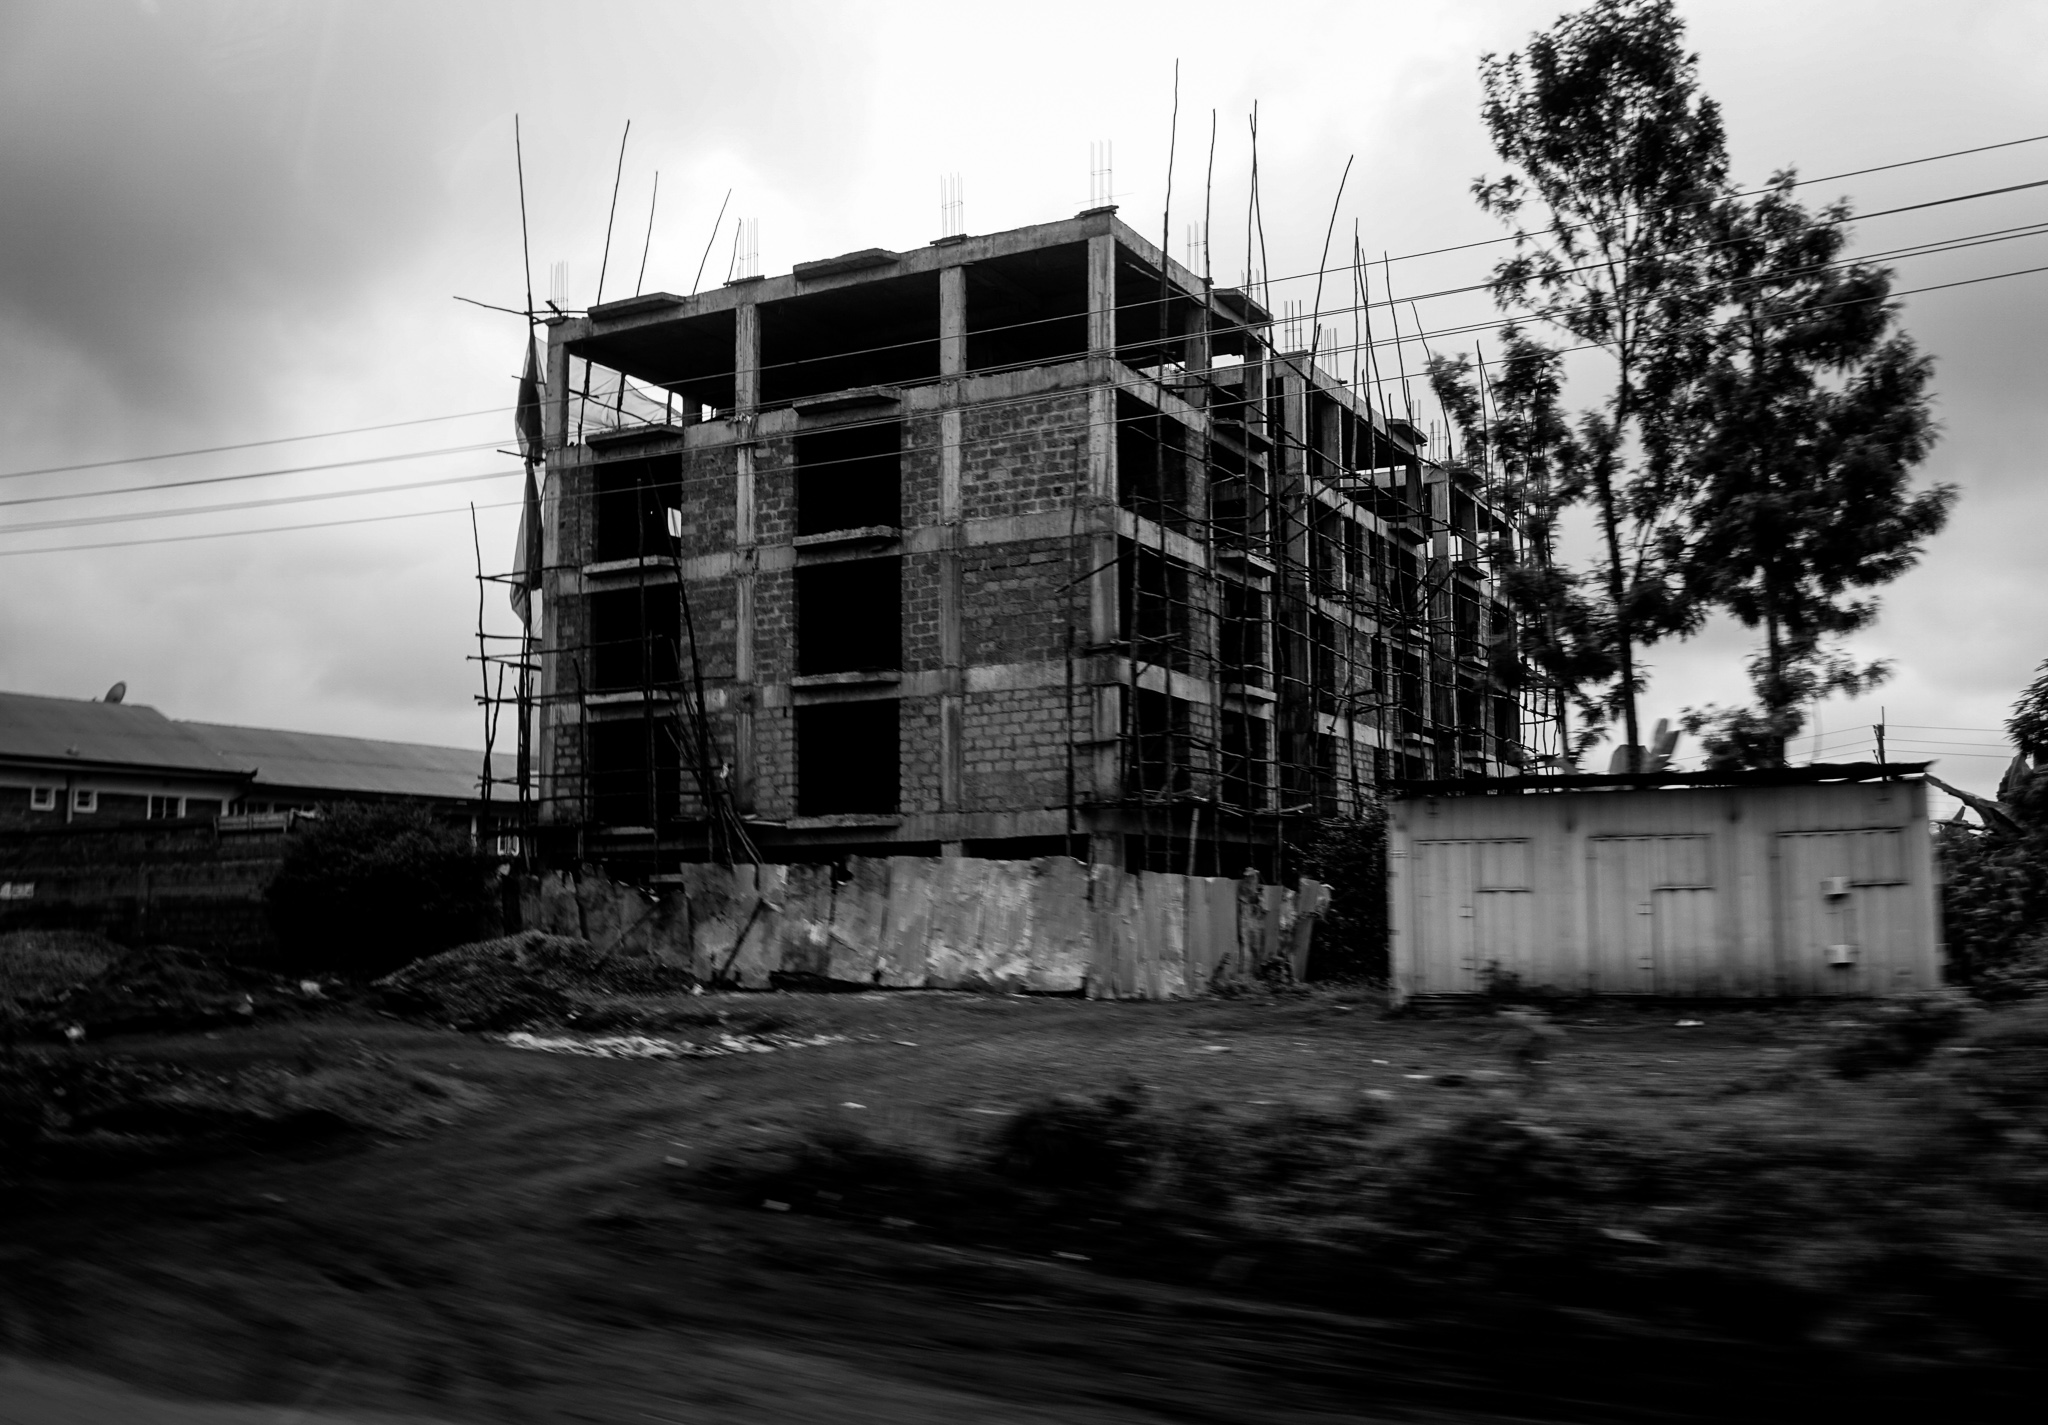 My first picture of a building undergoing construction was taken on the highway as I headed to the Maasai Mara national reserve. This shot displays my range as a photographer since the scene itself was hard to capture from inside the car.